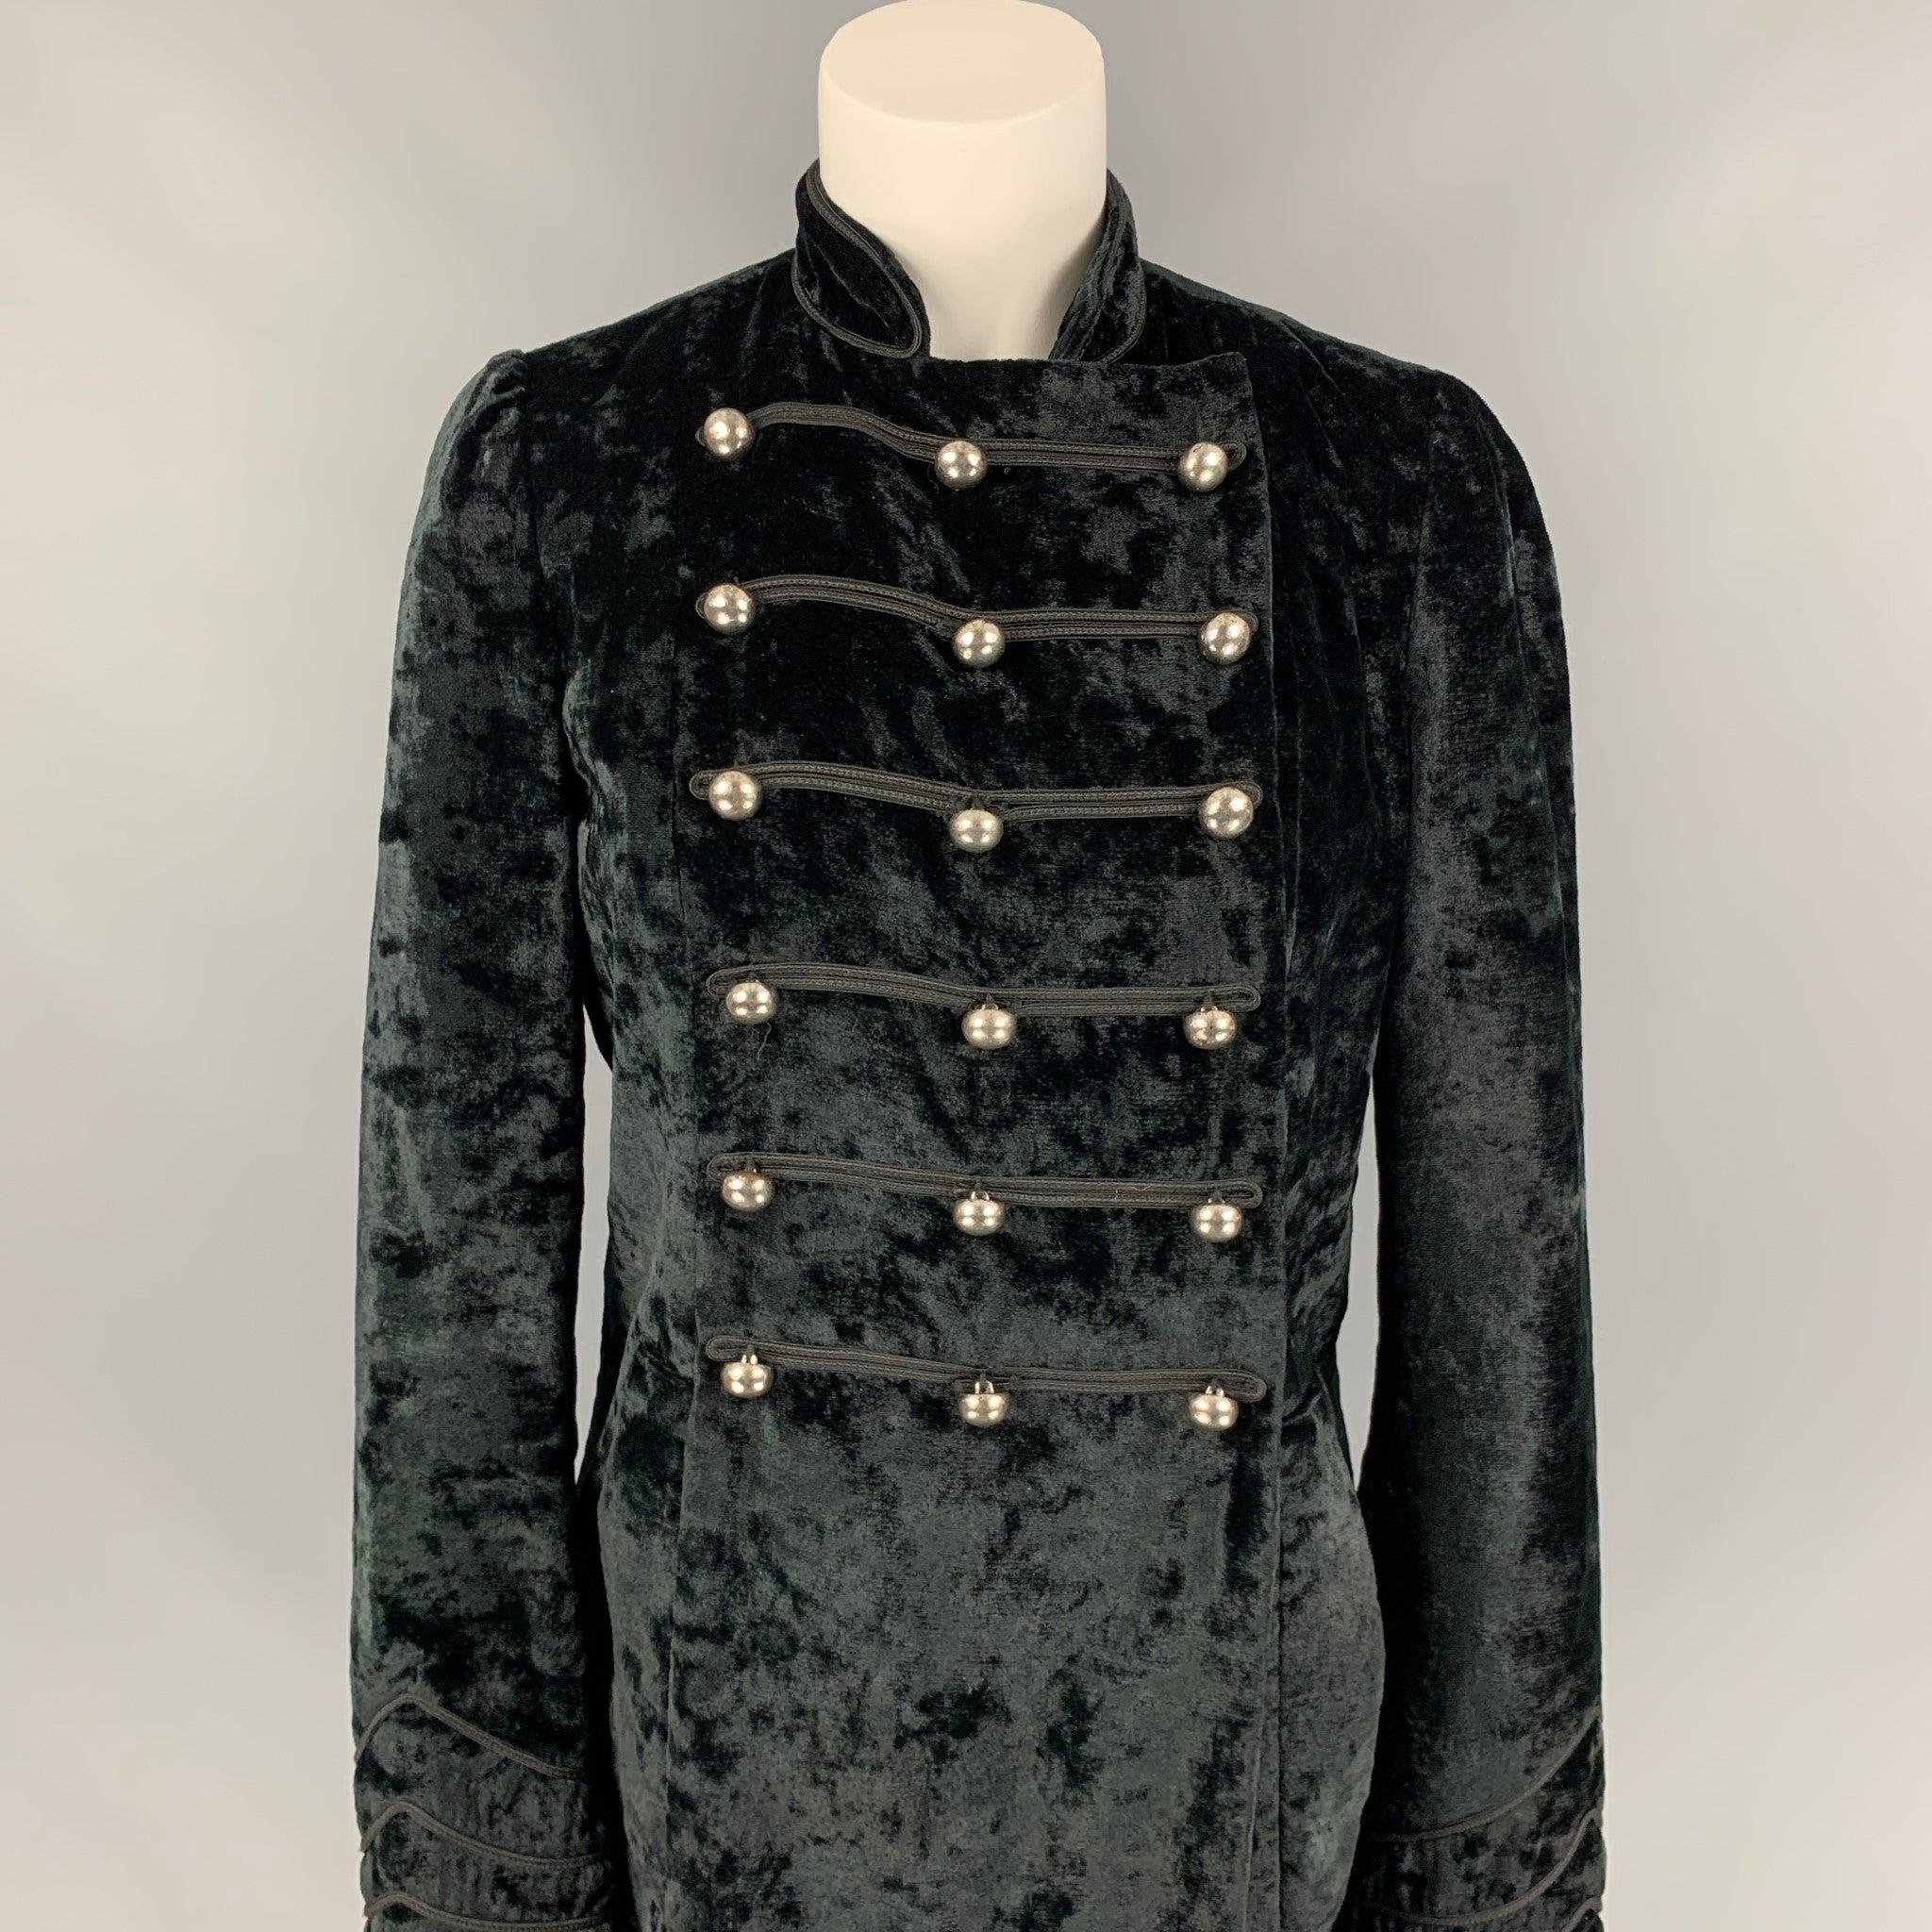 MARC by MARC JACOBS coat comes in a black velvet rayon / polyester featuring a stand up collar, back strap, silver tone metal buttons, slit pockets, and a double breasted closure.
Very Good
Pre-Owned Condition. 

Marked:  S 

Measurements: 
